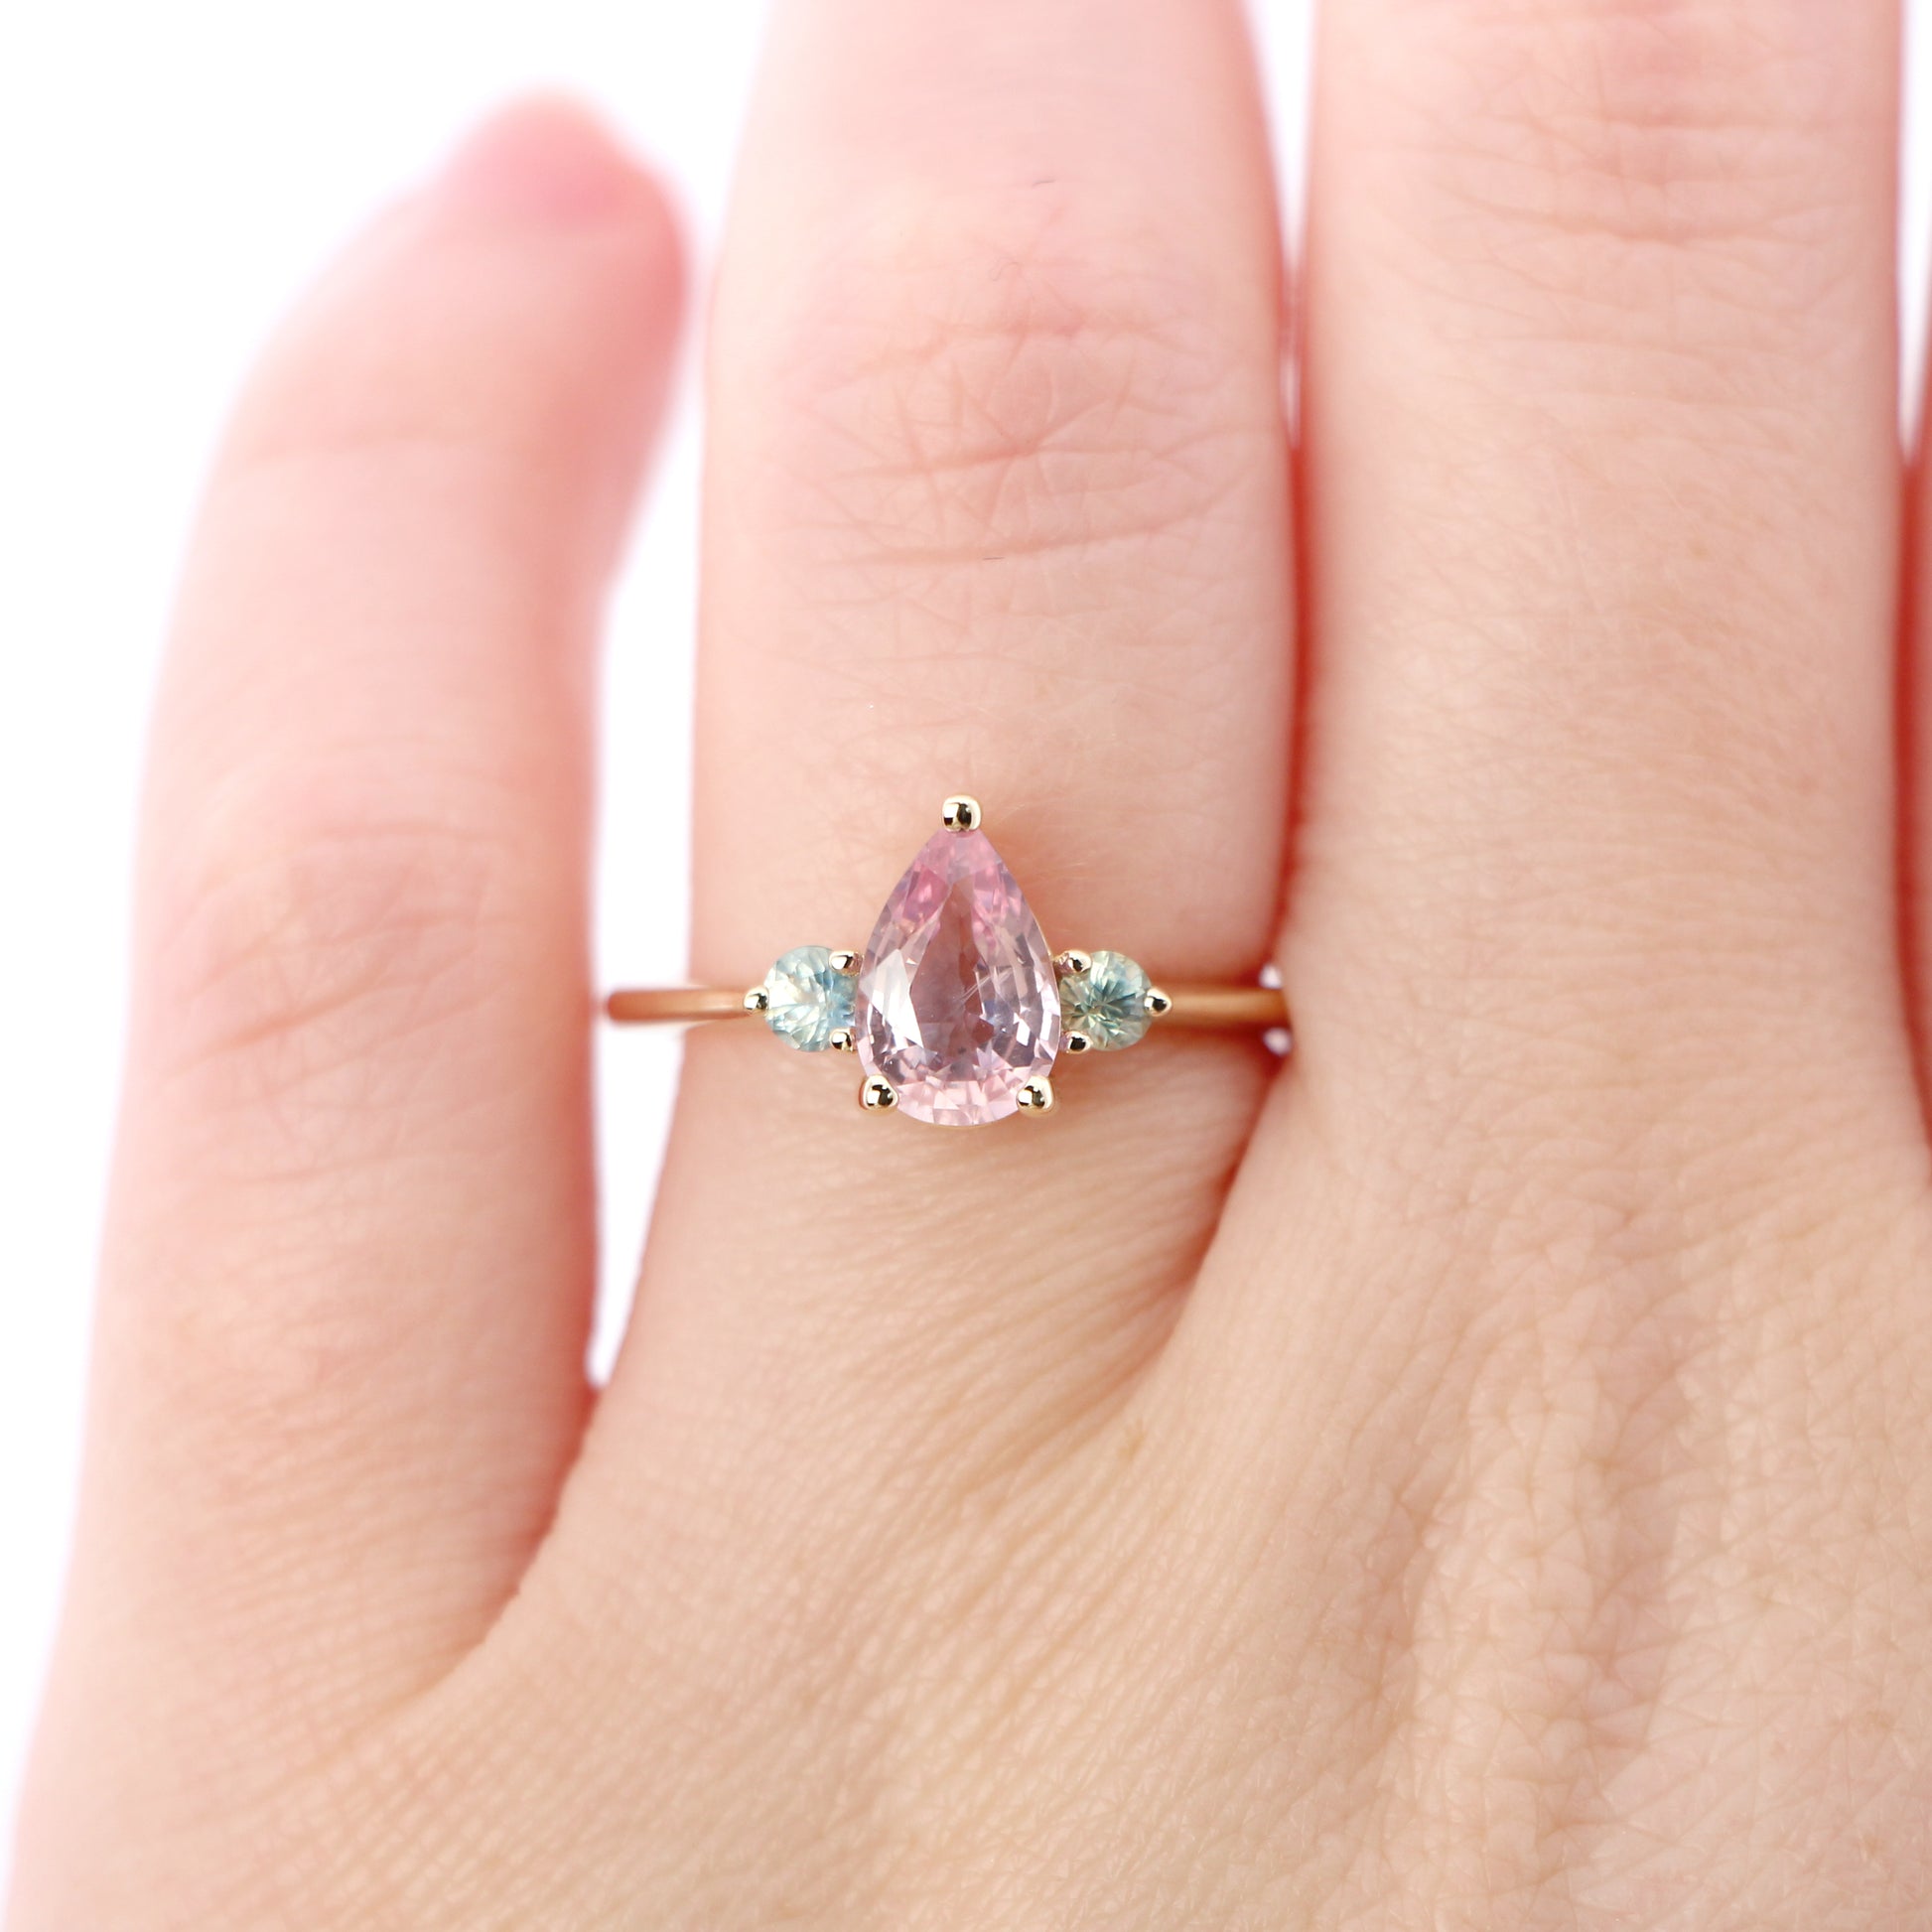 Drea Ring with a 1.40 Carat Clear Pink Pear Sapphire and Sapphire Accents in 14k Yellow Gold - Ready to Size and Ship - Midwinter Co. Alternative Bridal Rings and Modern Fine Jewelry